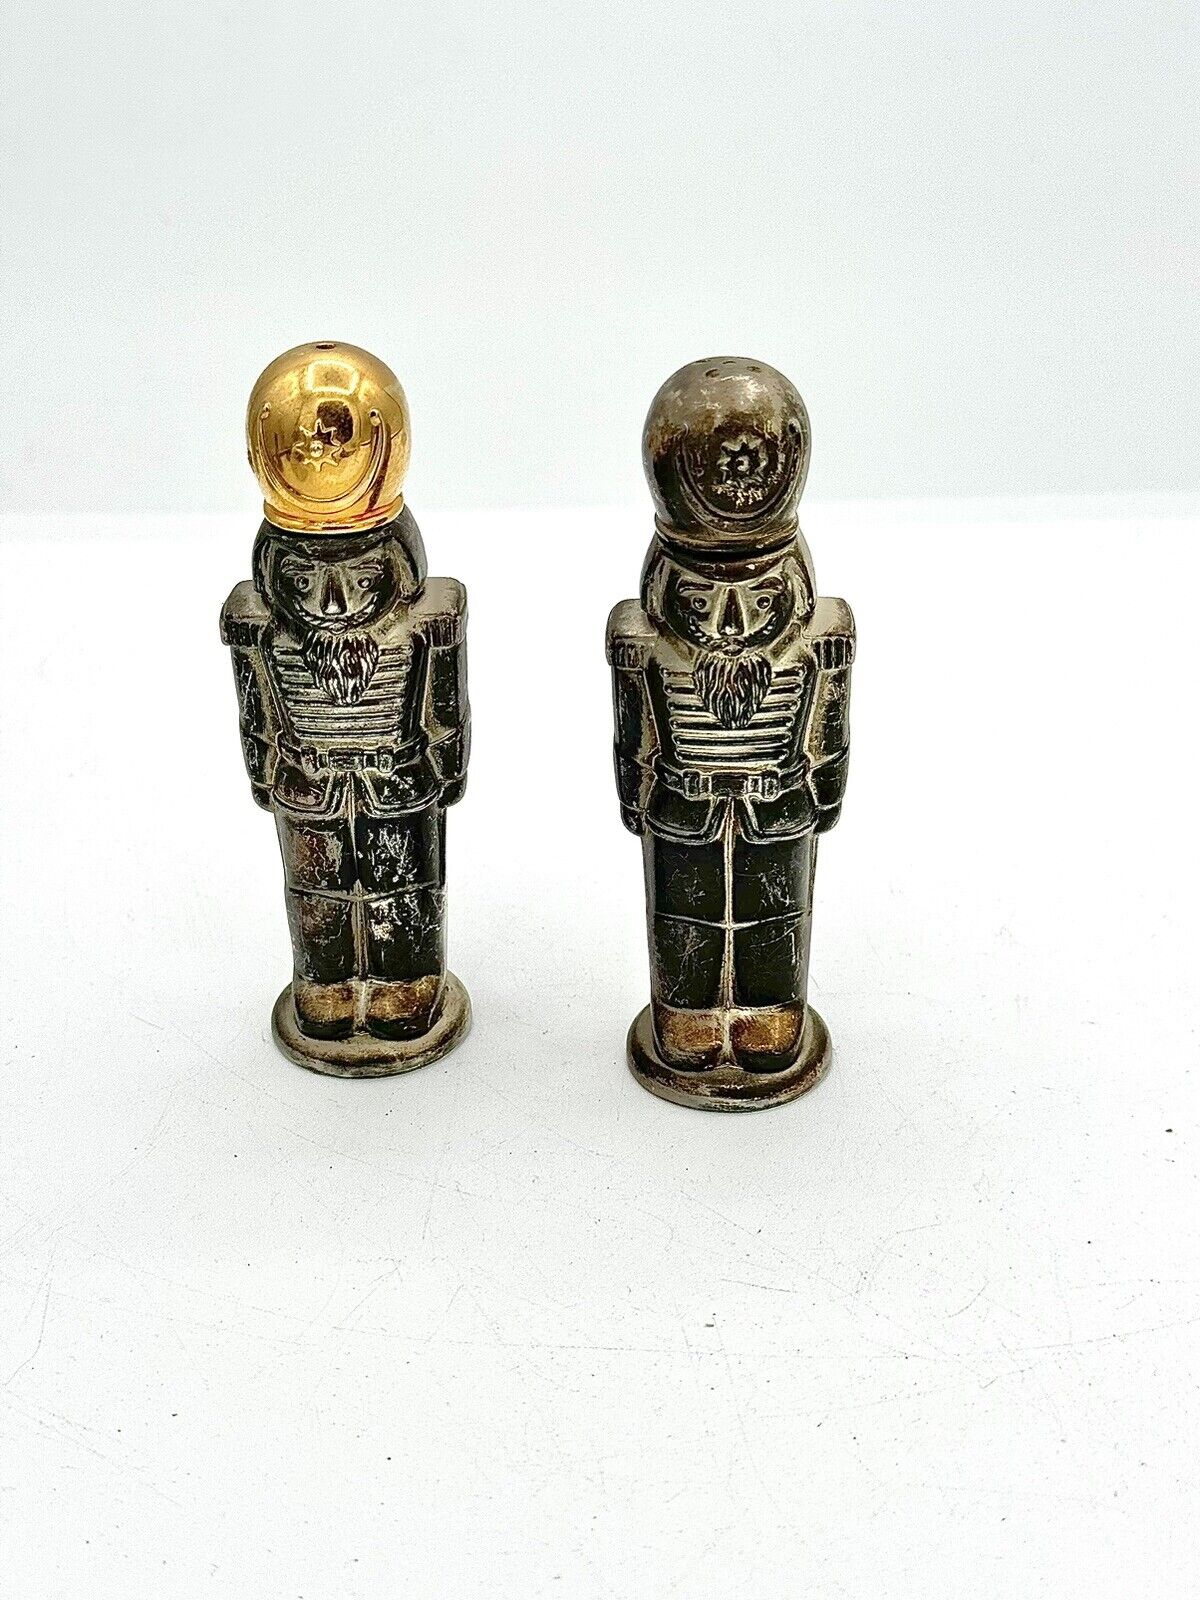 Godinger Silver Plated 1994 Nutcracker Soldiers Salt and Pepper Shakers